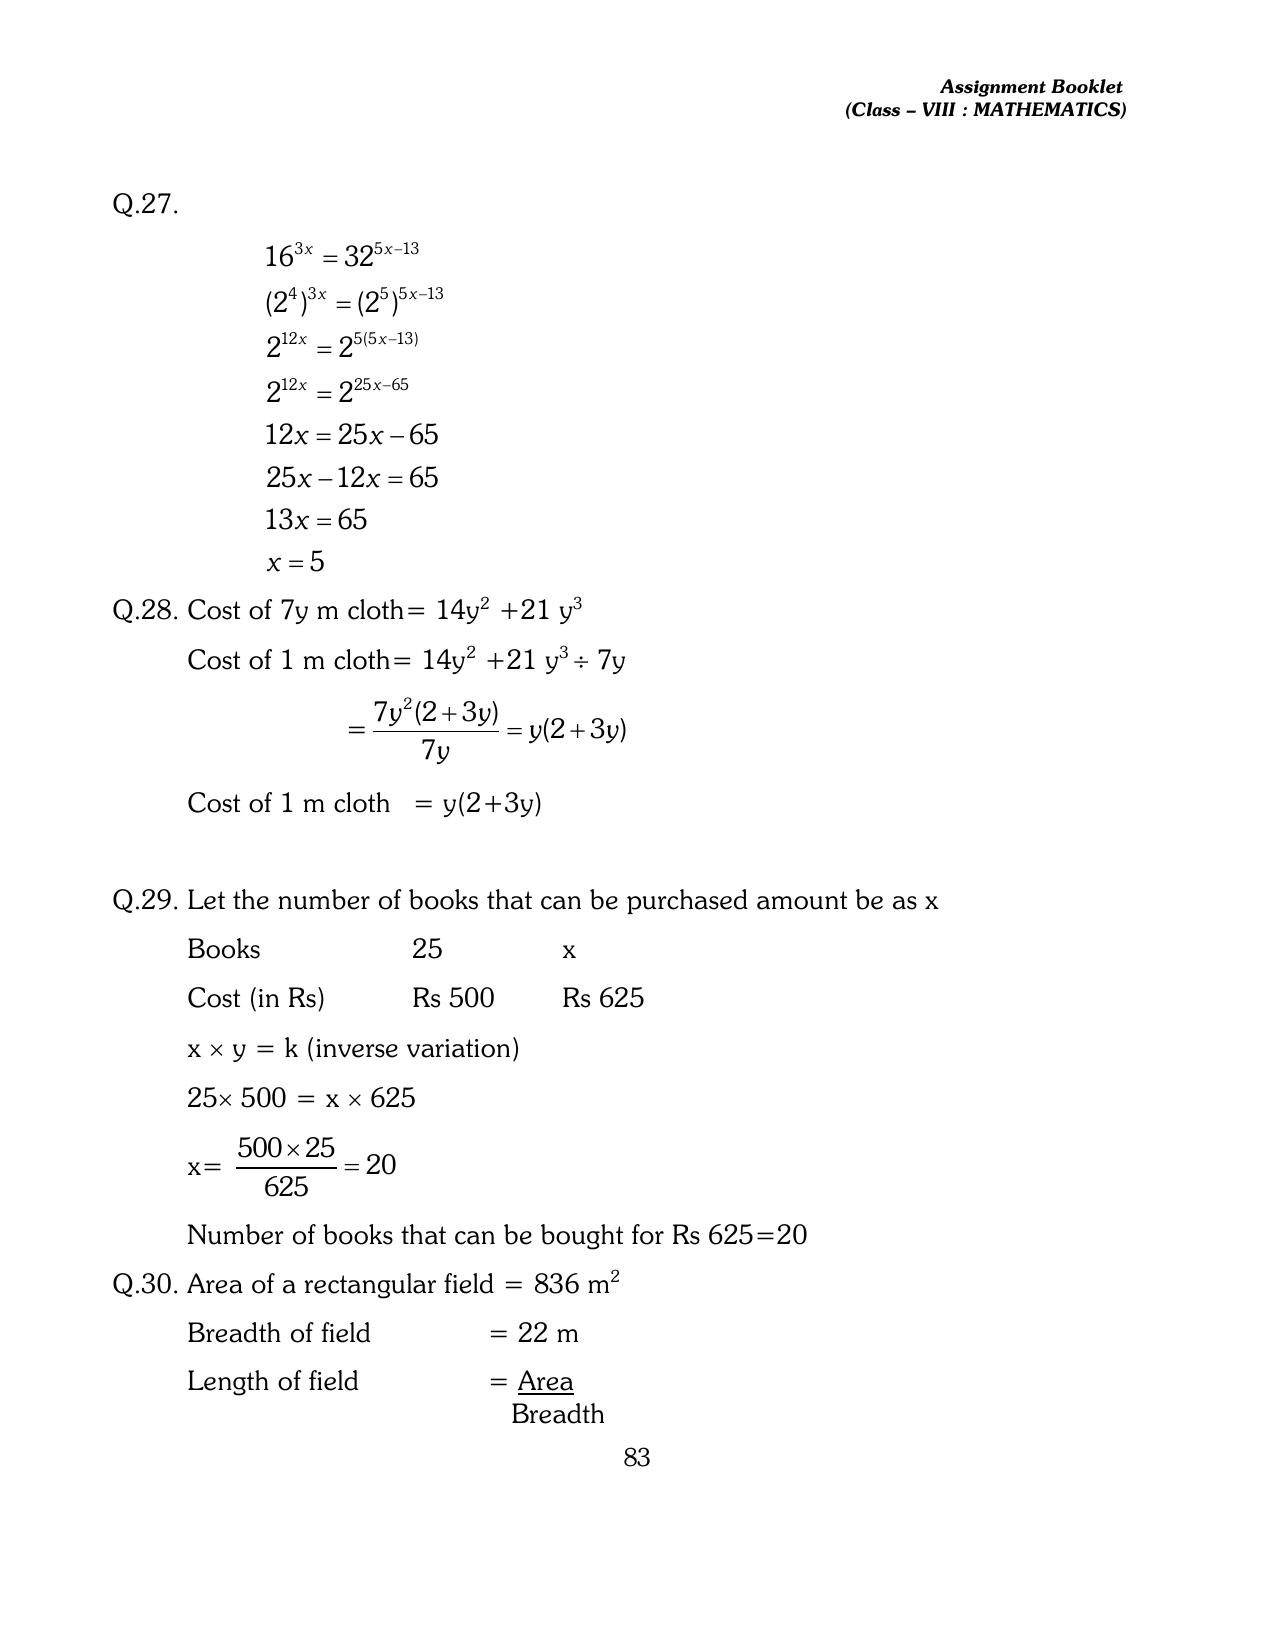 CBSE Worksheets for Class 8 Mathematics Assignment 13 - Page 73